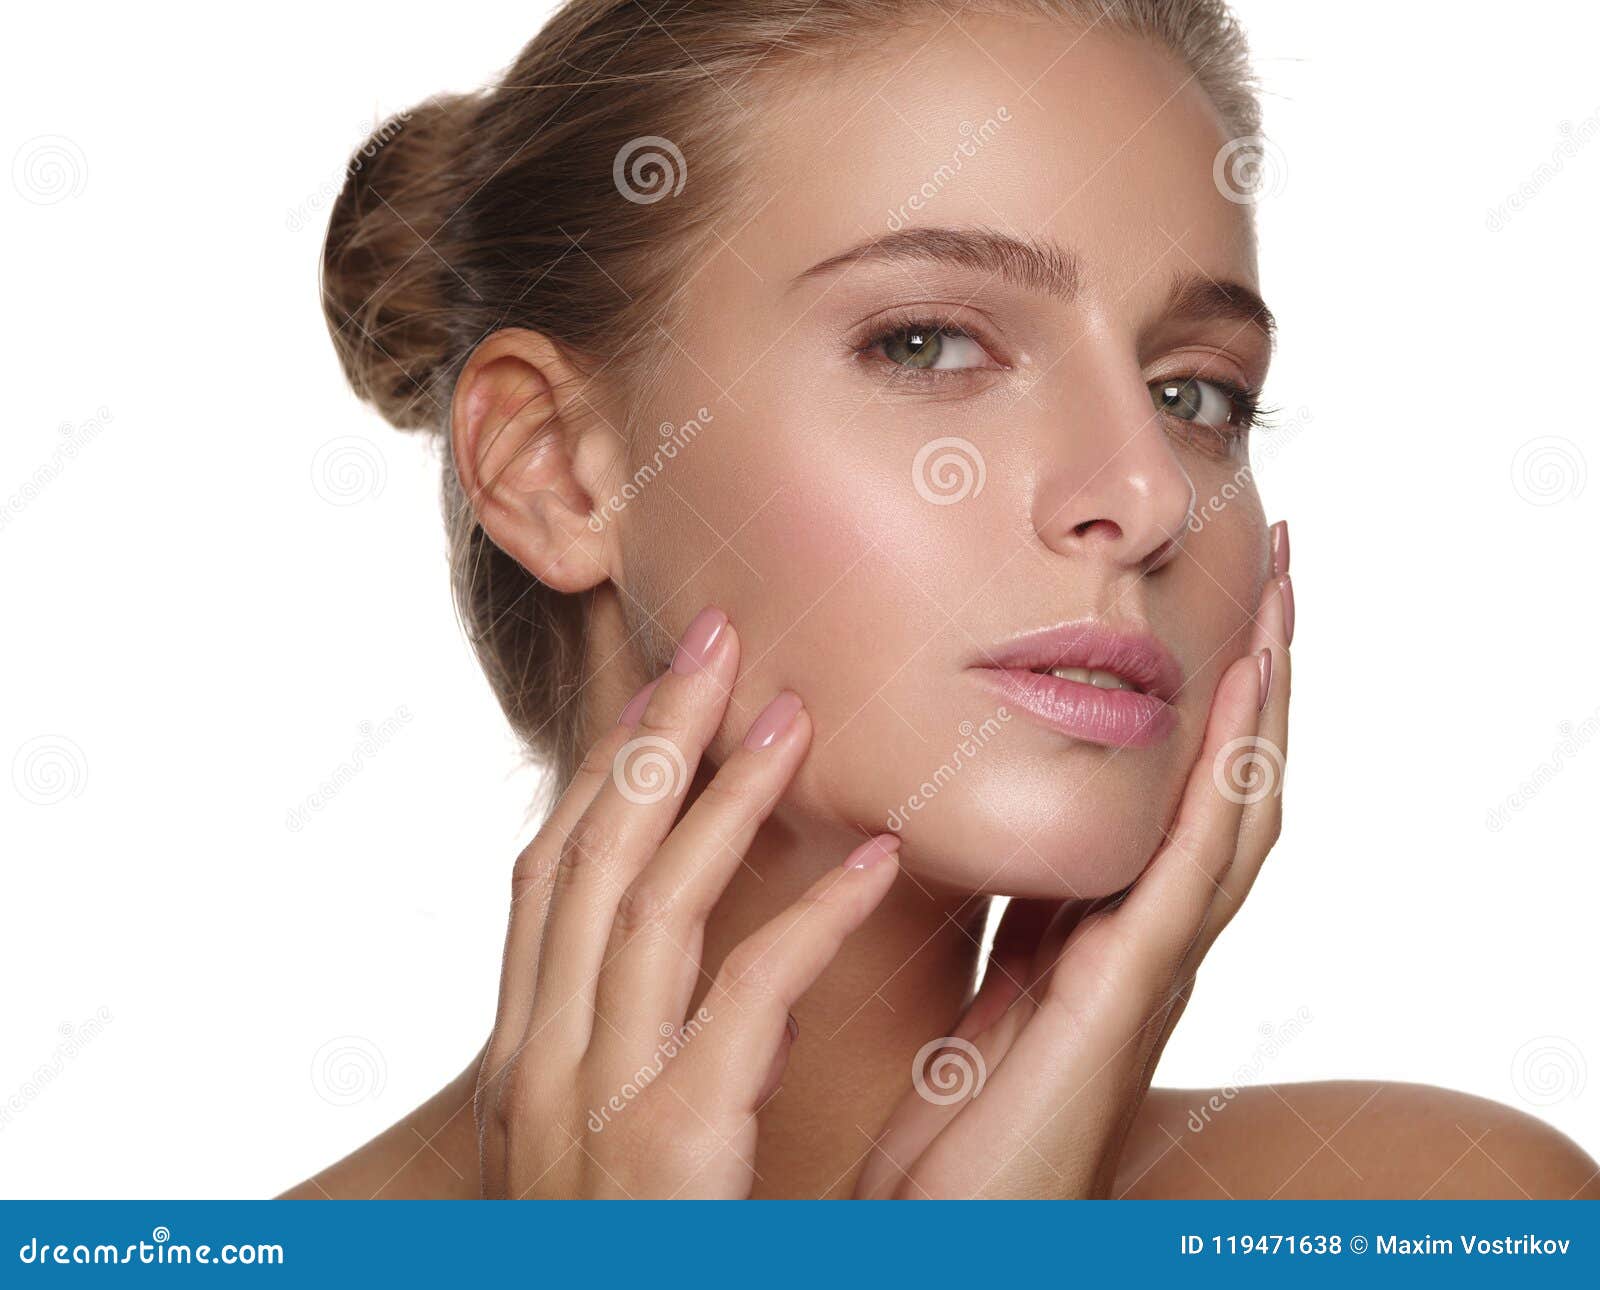 portrait of a young girl with pure and healthy smooth skin without makeup